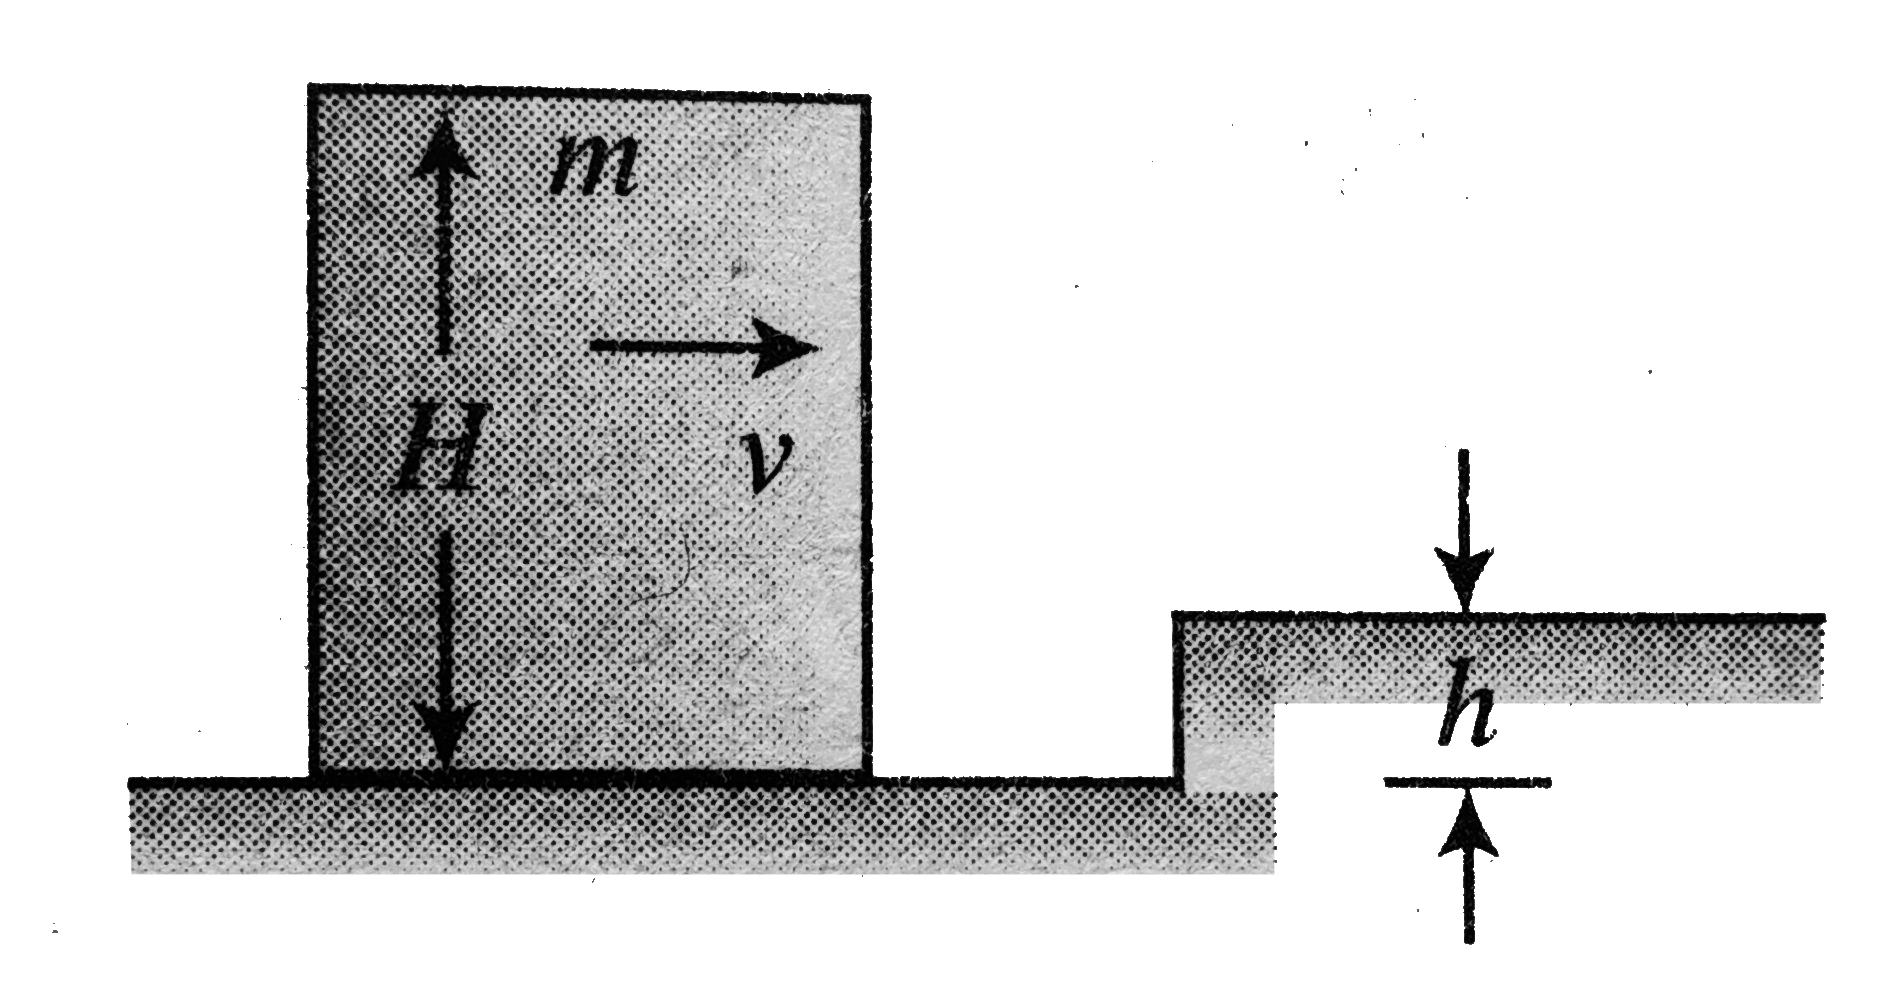 A cube of mass m and height H slides with a speed v. It strikes the obstacle of height h = (H/4). Find the speed of the CM of the cube just after the collision.